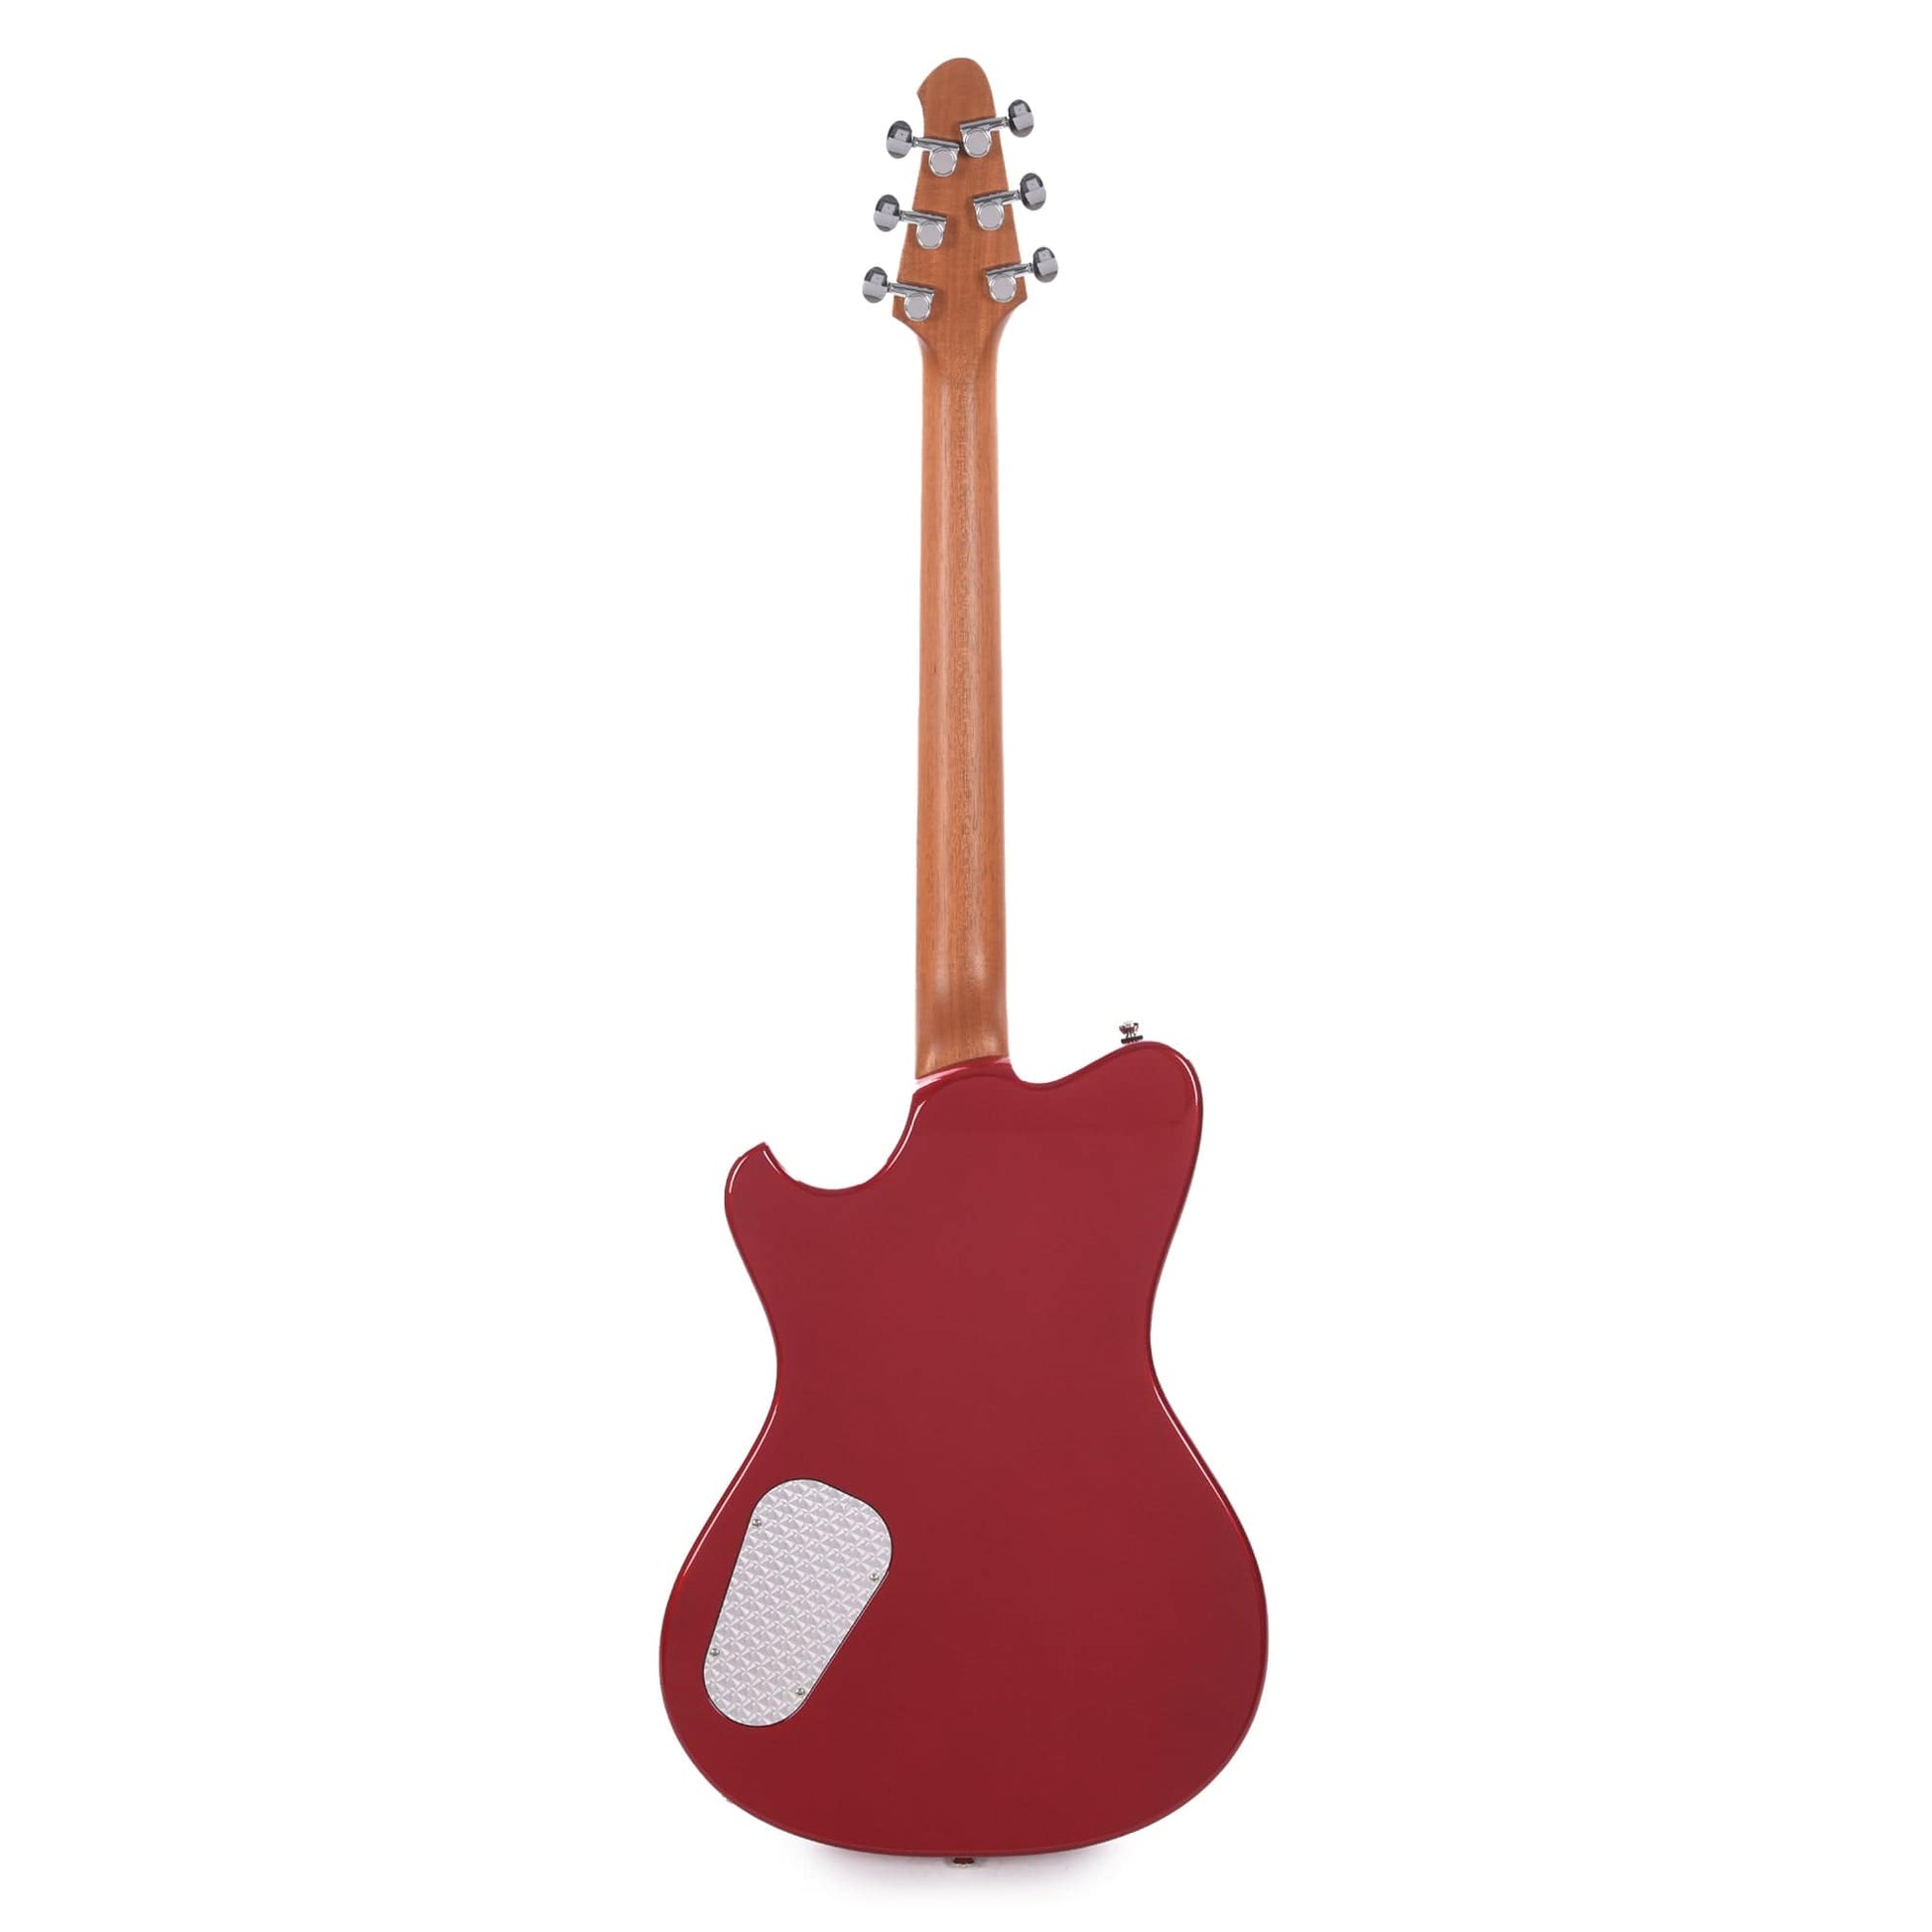 Powers Electric A-Type Crystal Red Metallic Electric Guitars / Solid Body